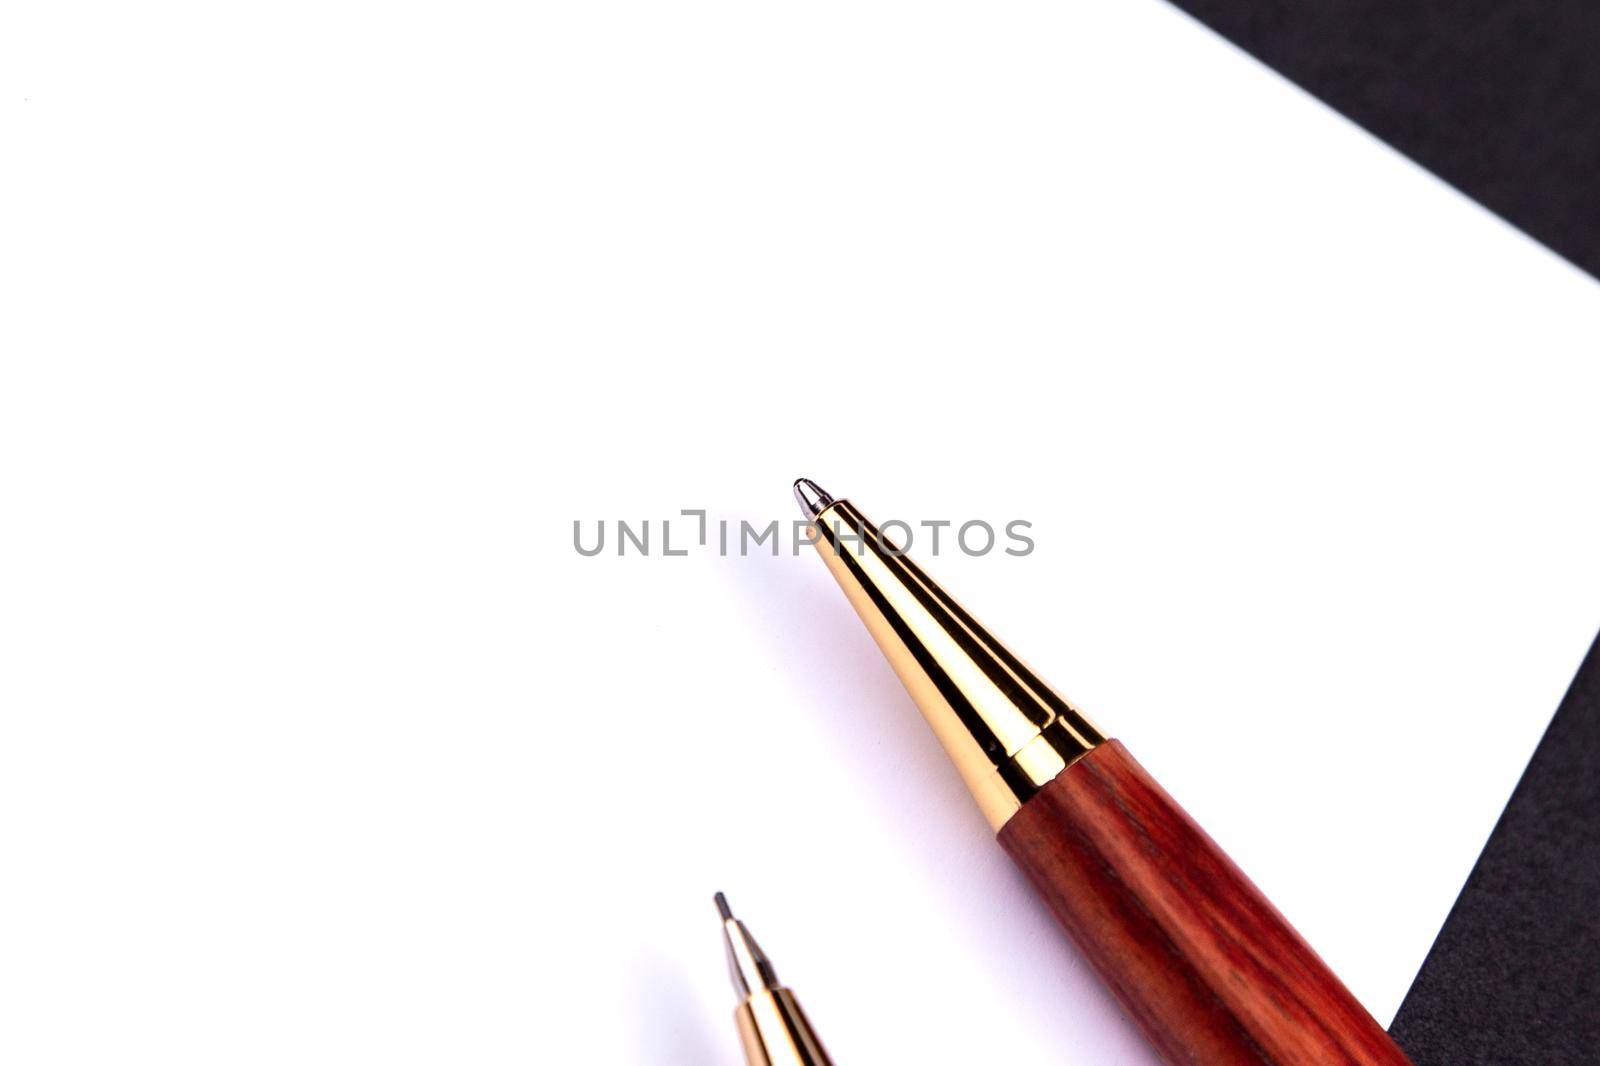 Luxury pen and mechanical pencil in wood and gold with a white sheet of paper.